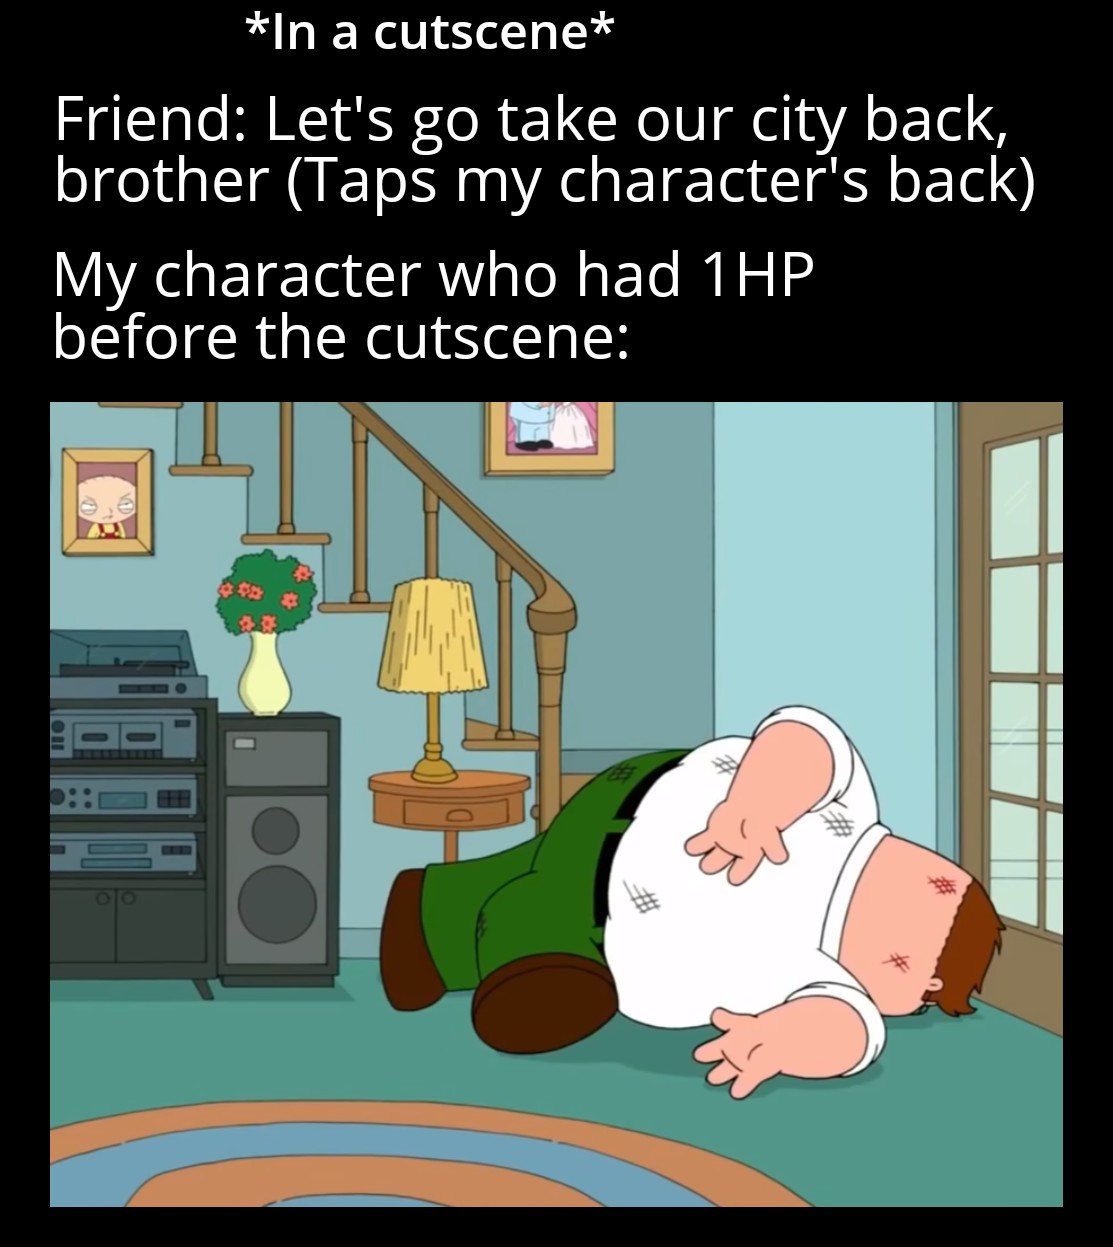 peter griffin fall - In a cutscene Friend Let's go take our city back, brother Taps my character's back My character who had 1HP before the cutscene